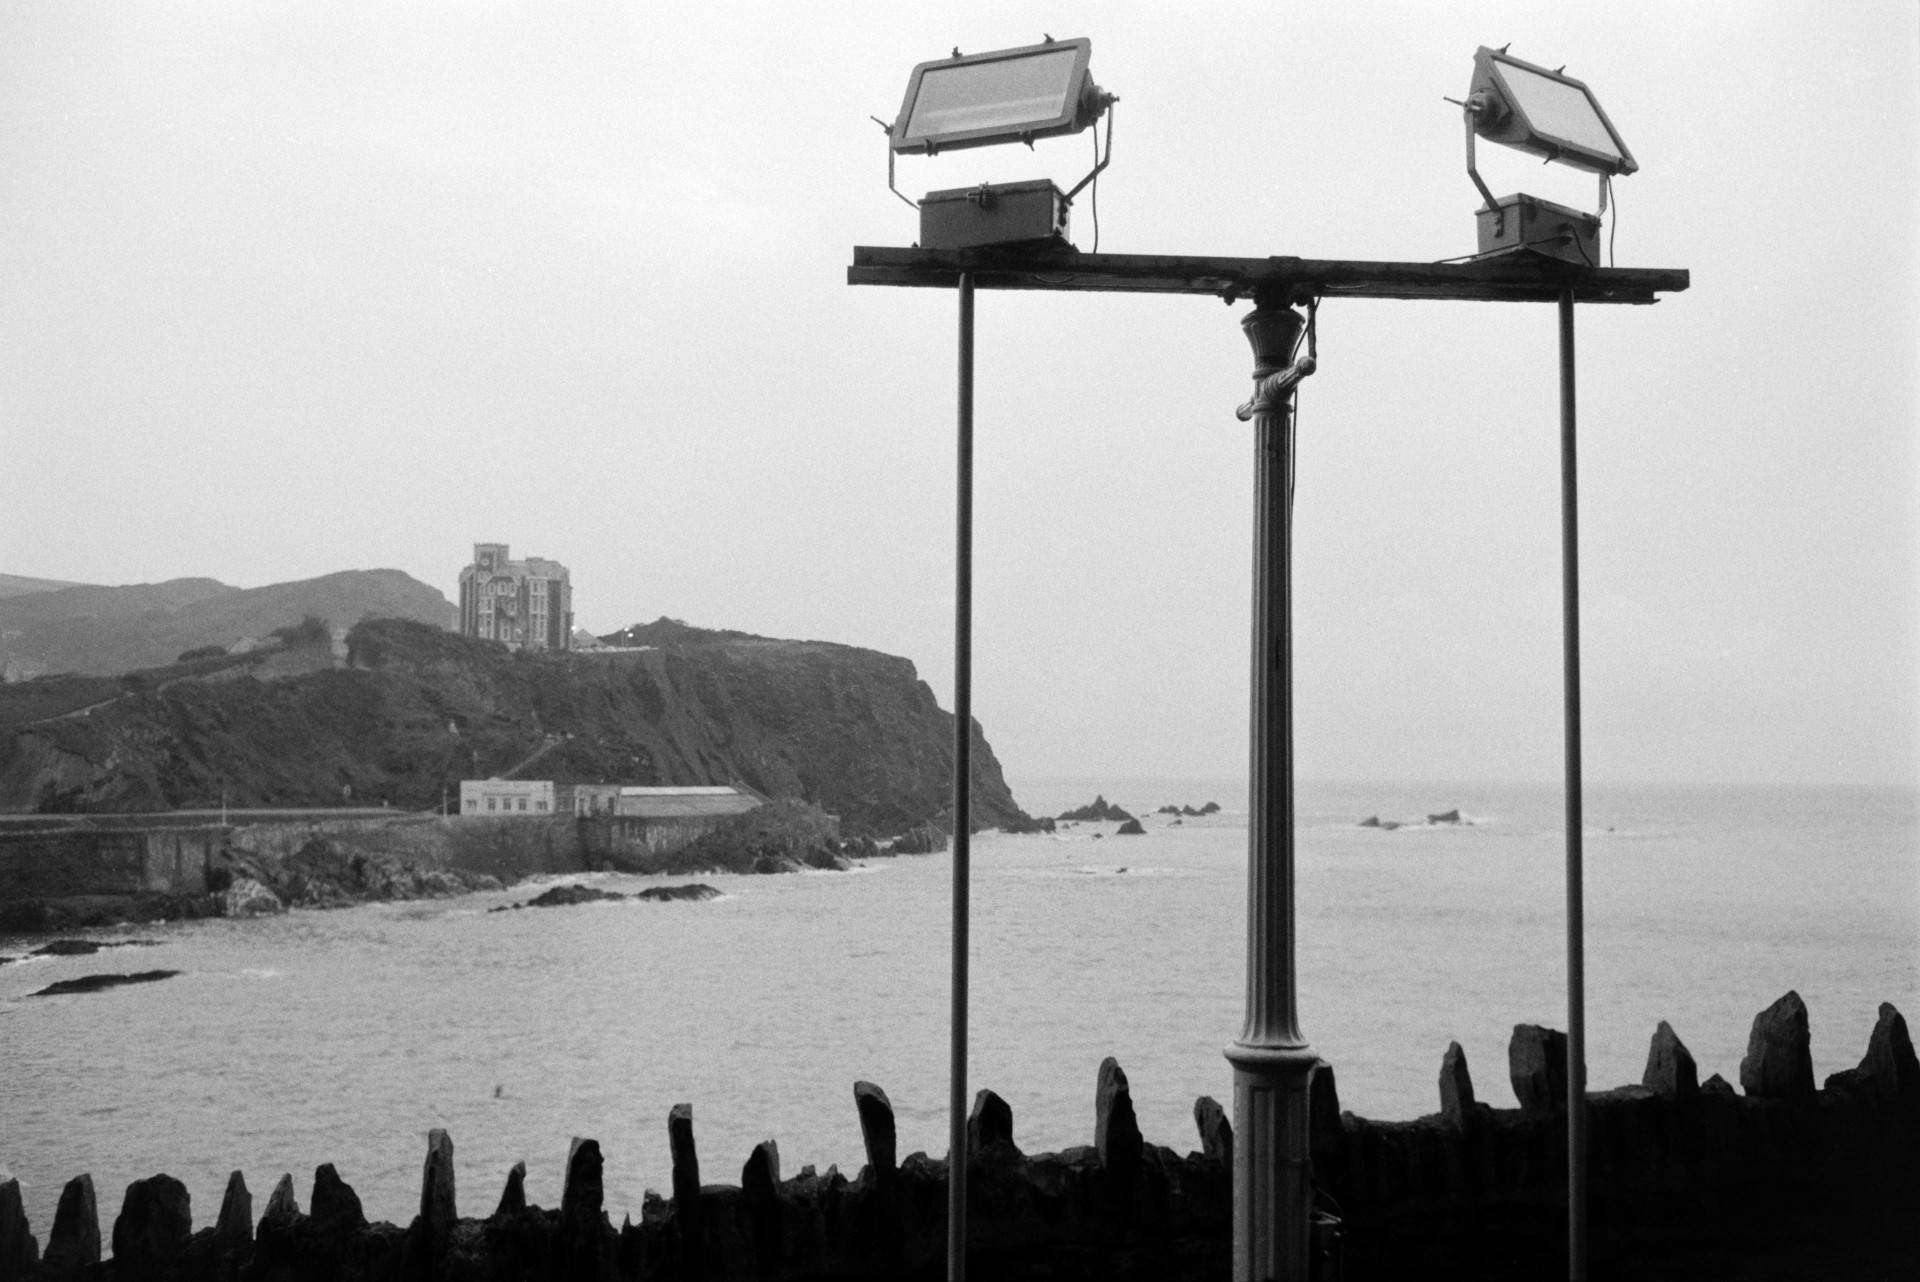 Floodlights on the seafront at Ilfracombe. The sea and a clifftop hotel can be seen in the background.